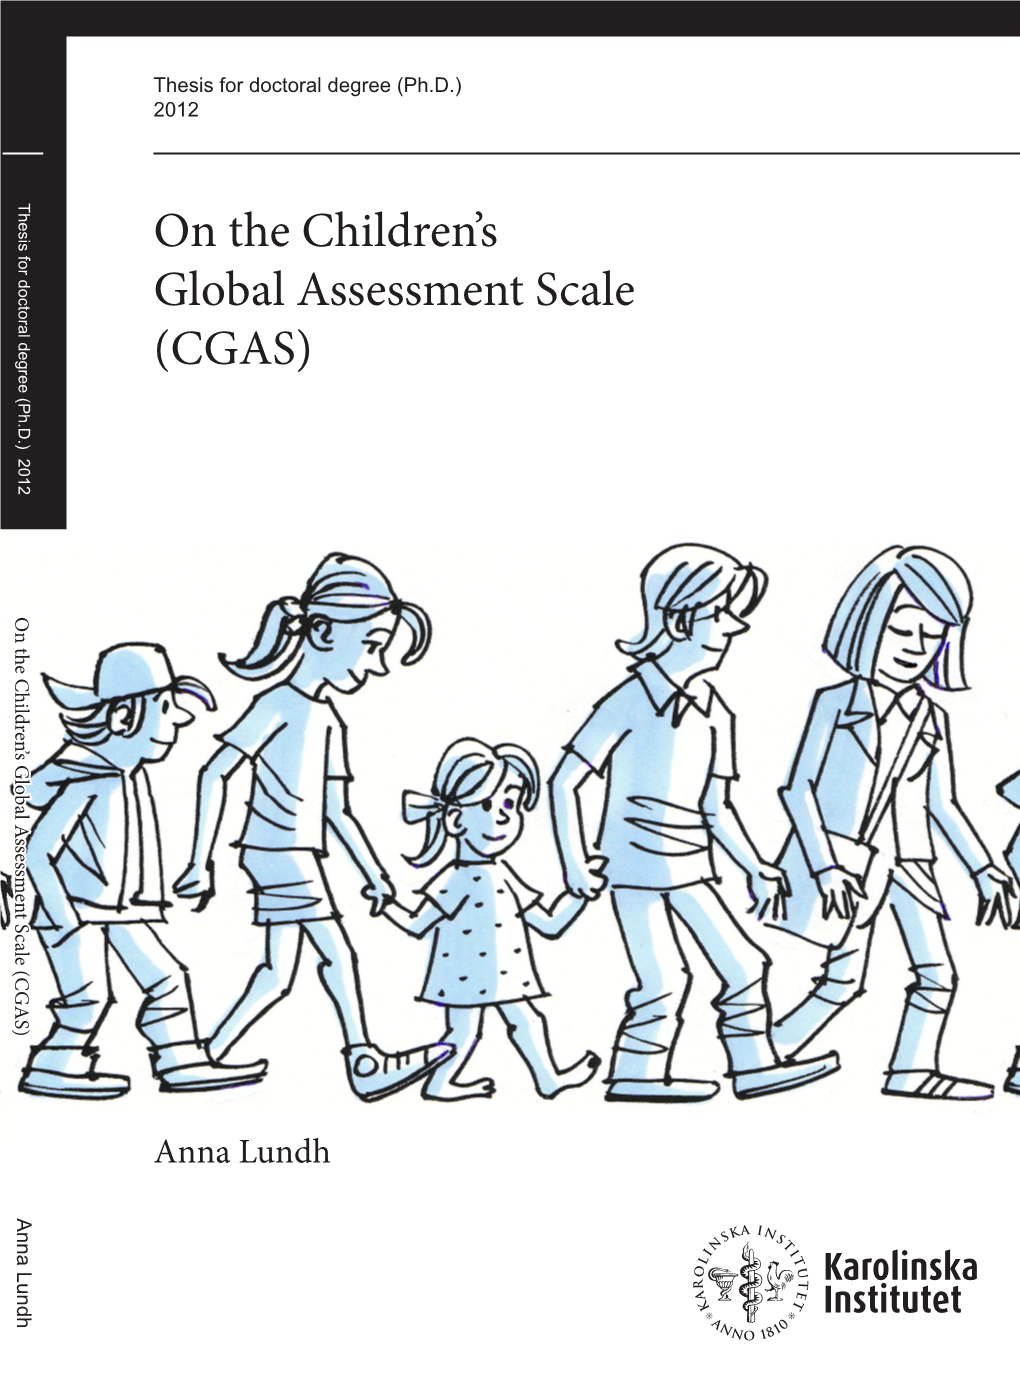 On the Children's Global Assessment Scale (CGAS)